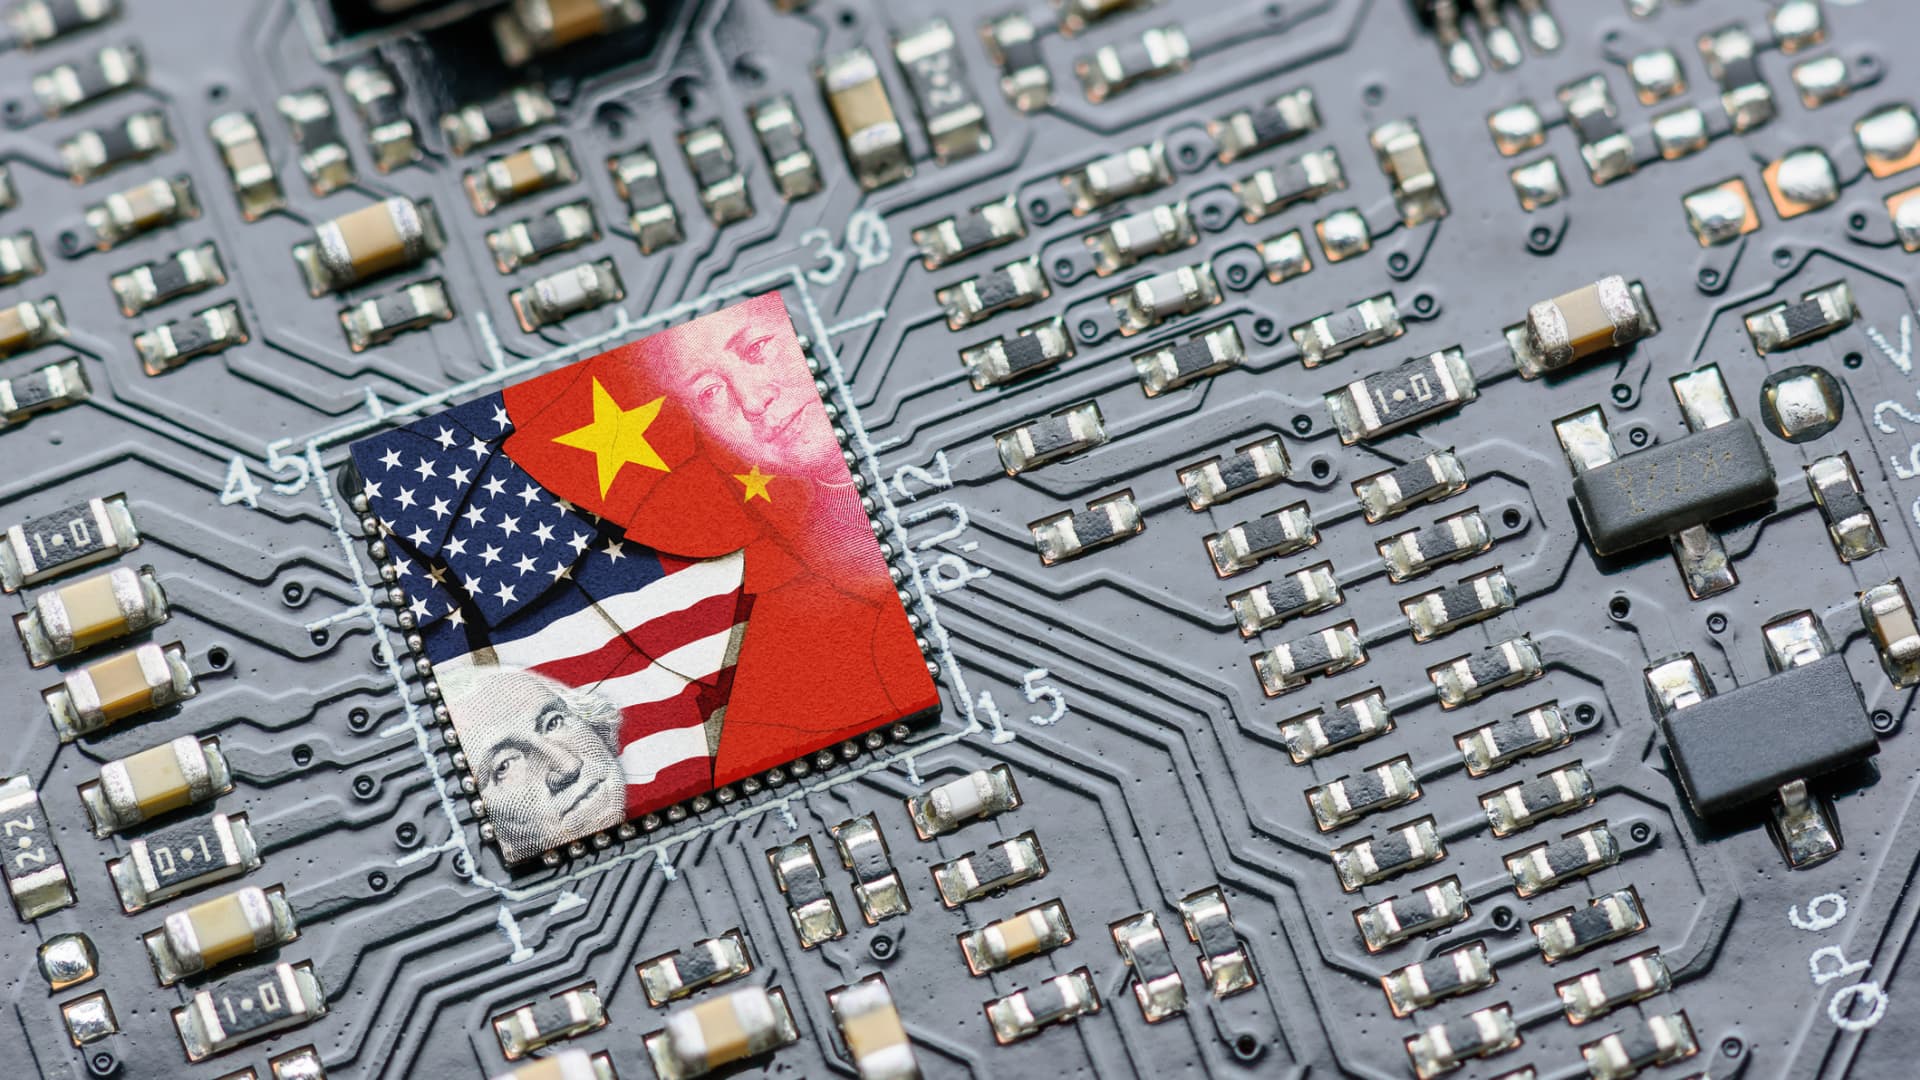 AMD, Intel dip on report China advised telecoms to remove worldwide chips